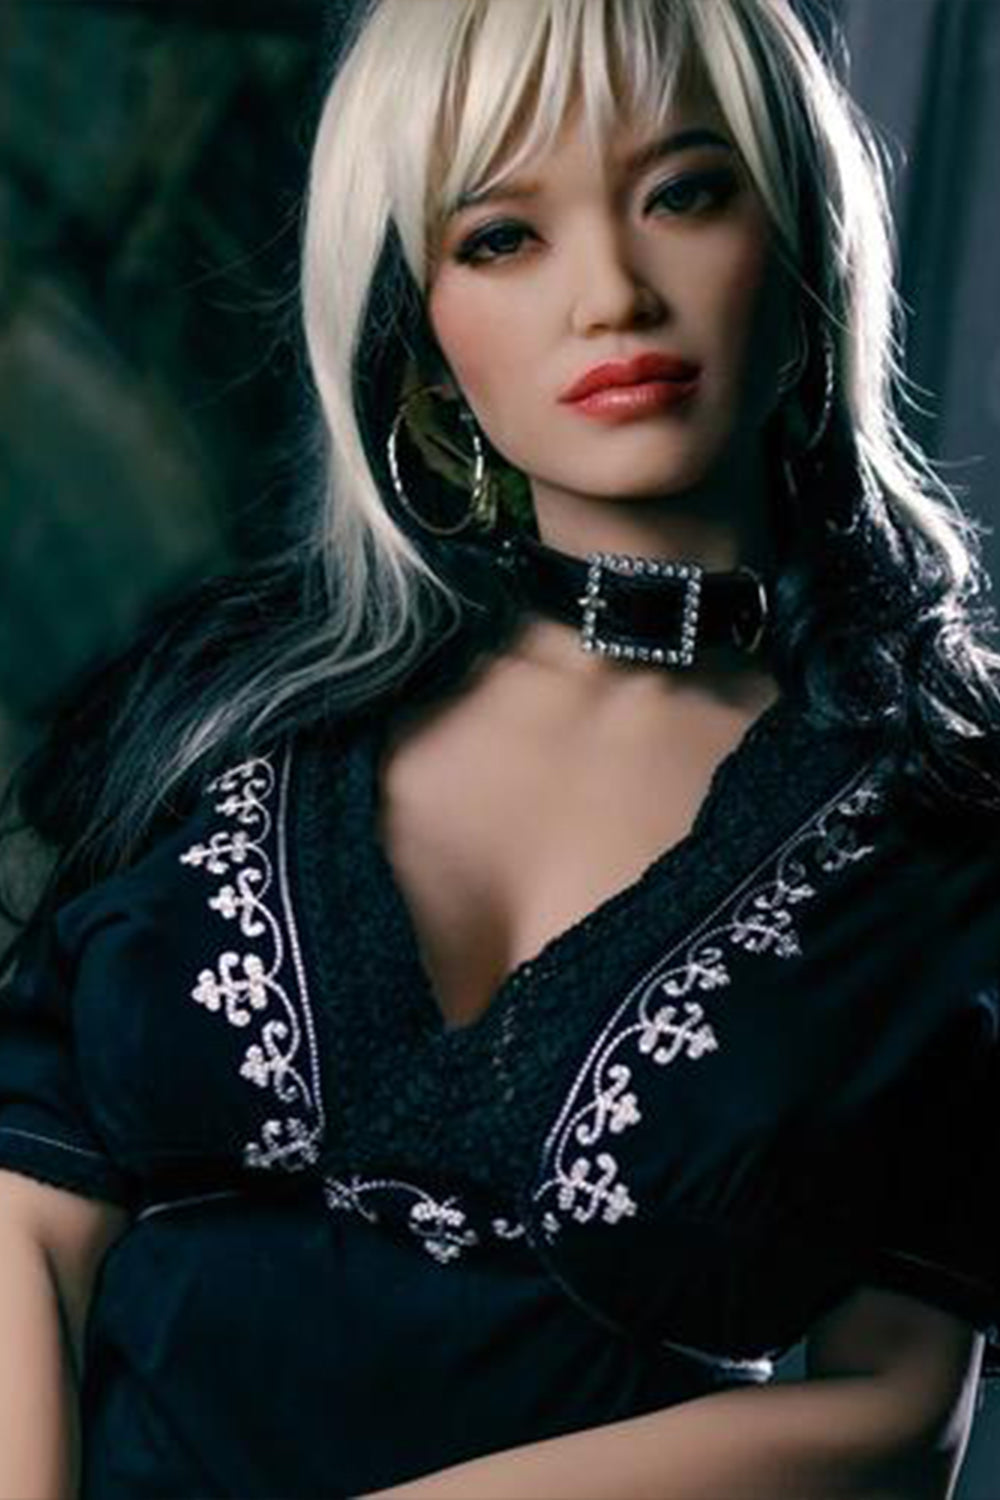 SexDollBay Vicky 160cm with #GRAY HAIR Lead Singer Of A Rock Band Sex Doll